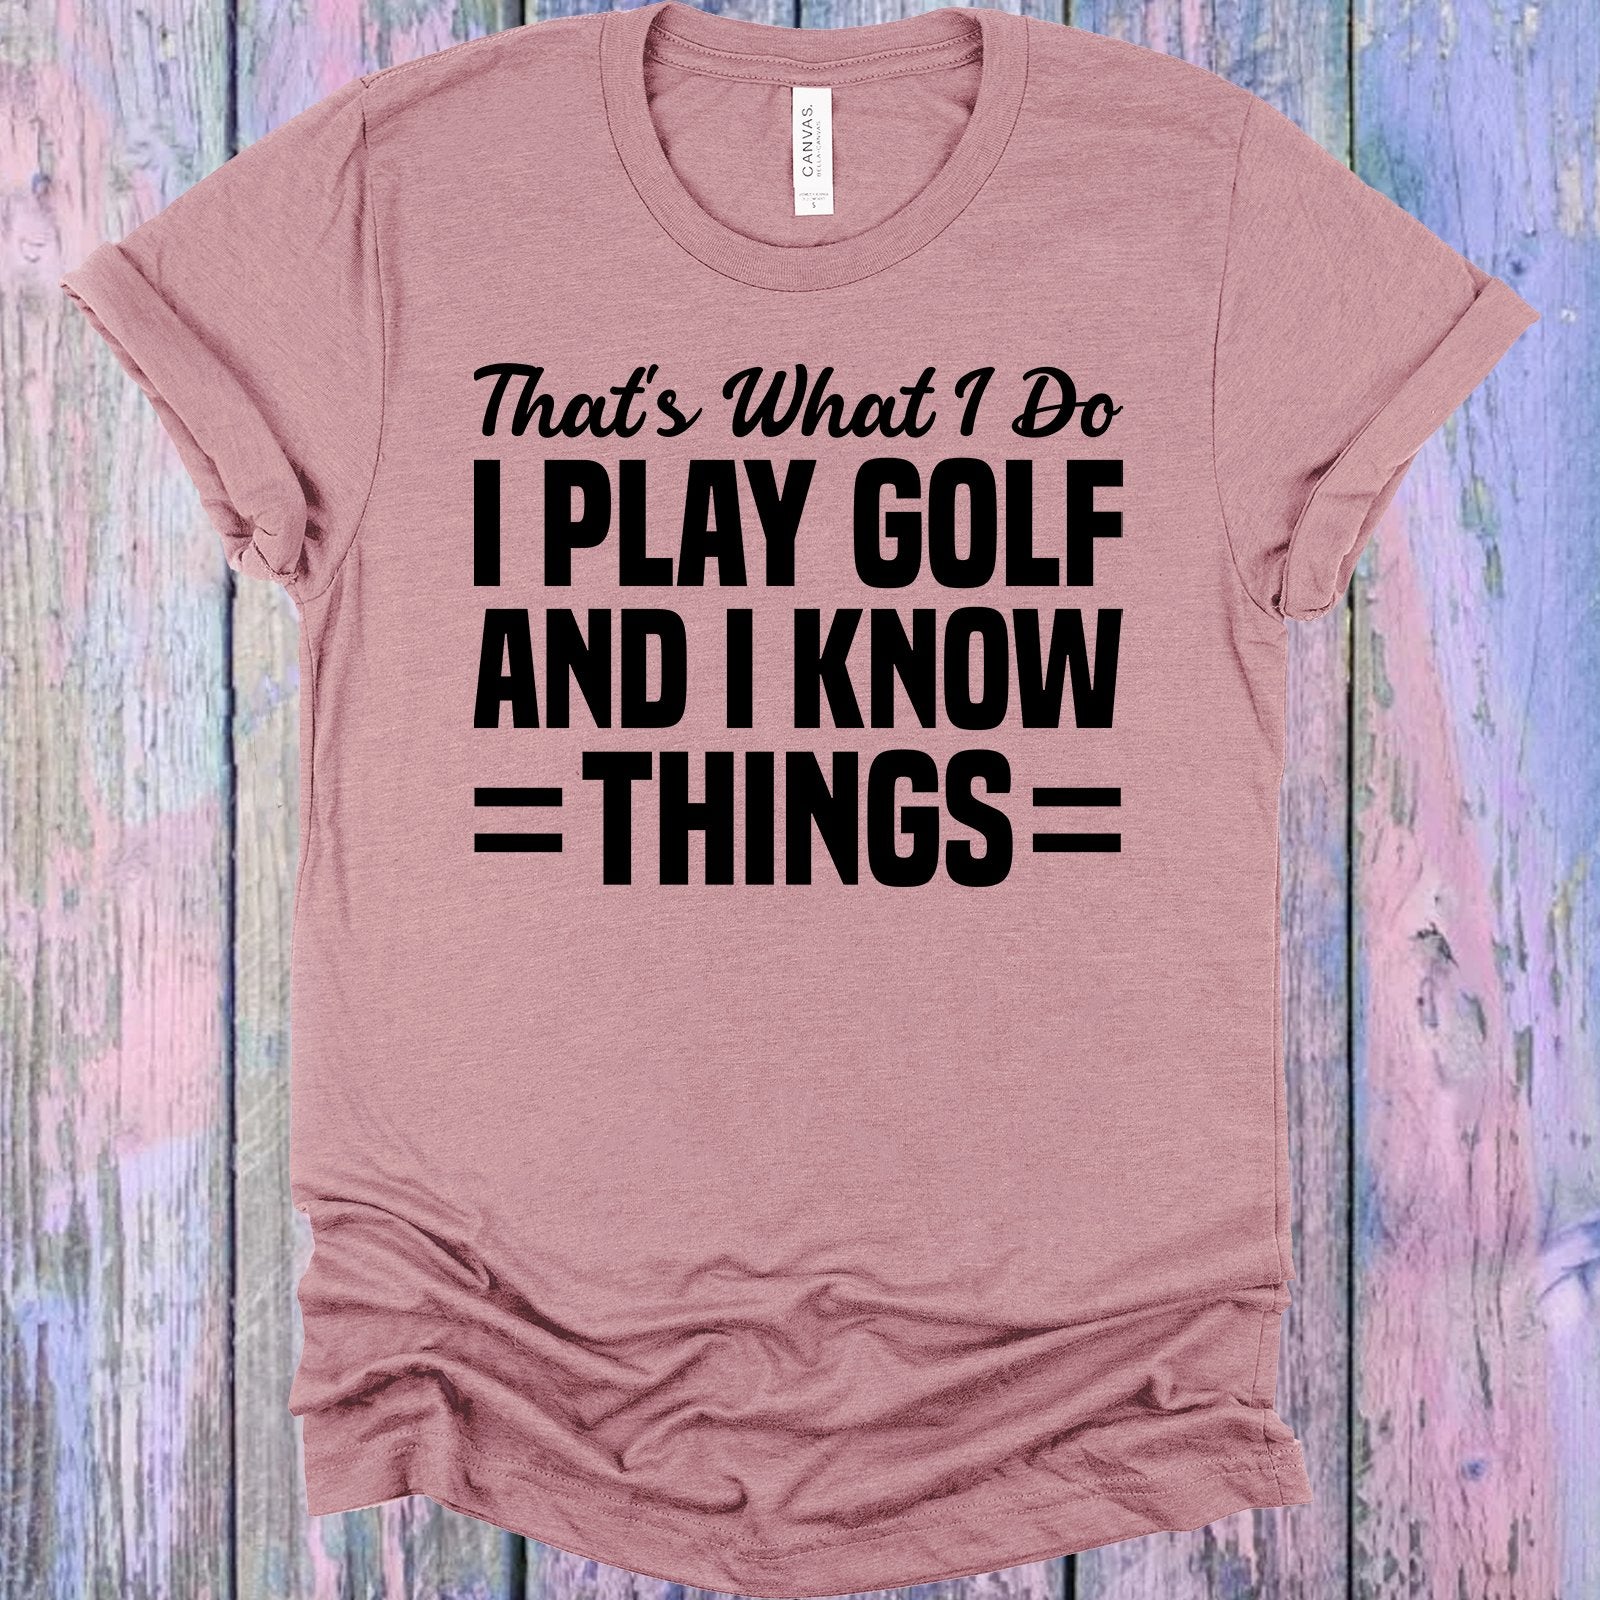 Thats What I Do Play Golf And Know Things Graphic Tee Graphic Tee